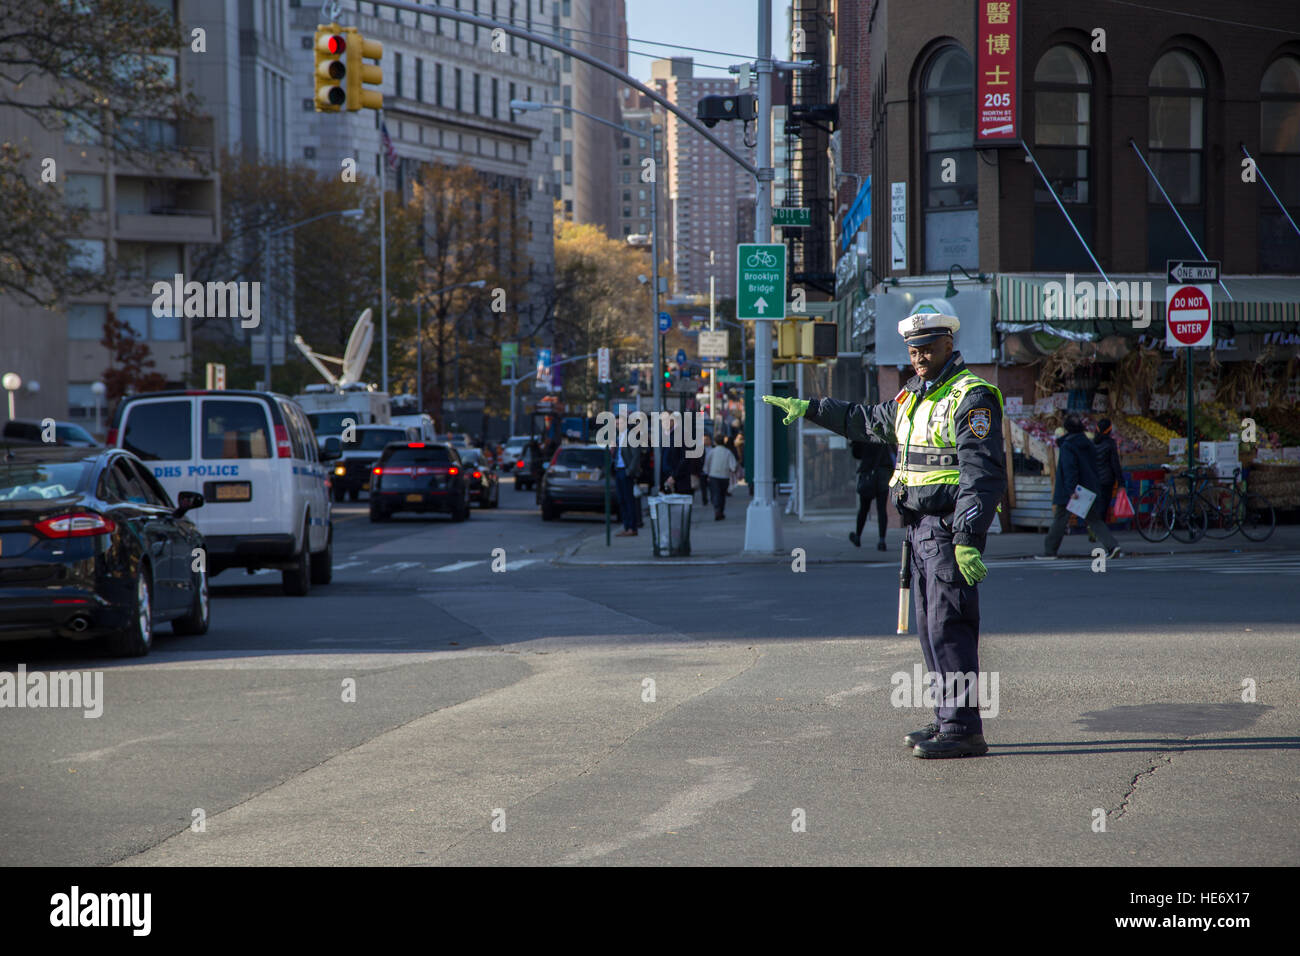 New York, United States of America - November 17, 2016: A black traffic cop regulating the traffic in Lower Manhattan district Stock Photo